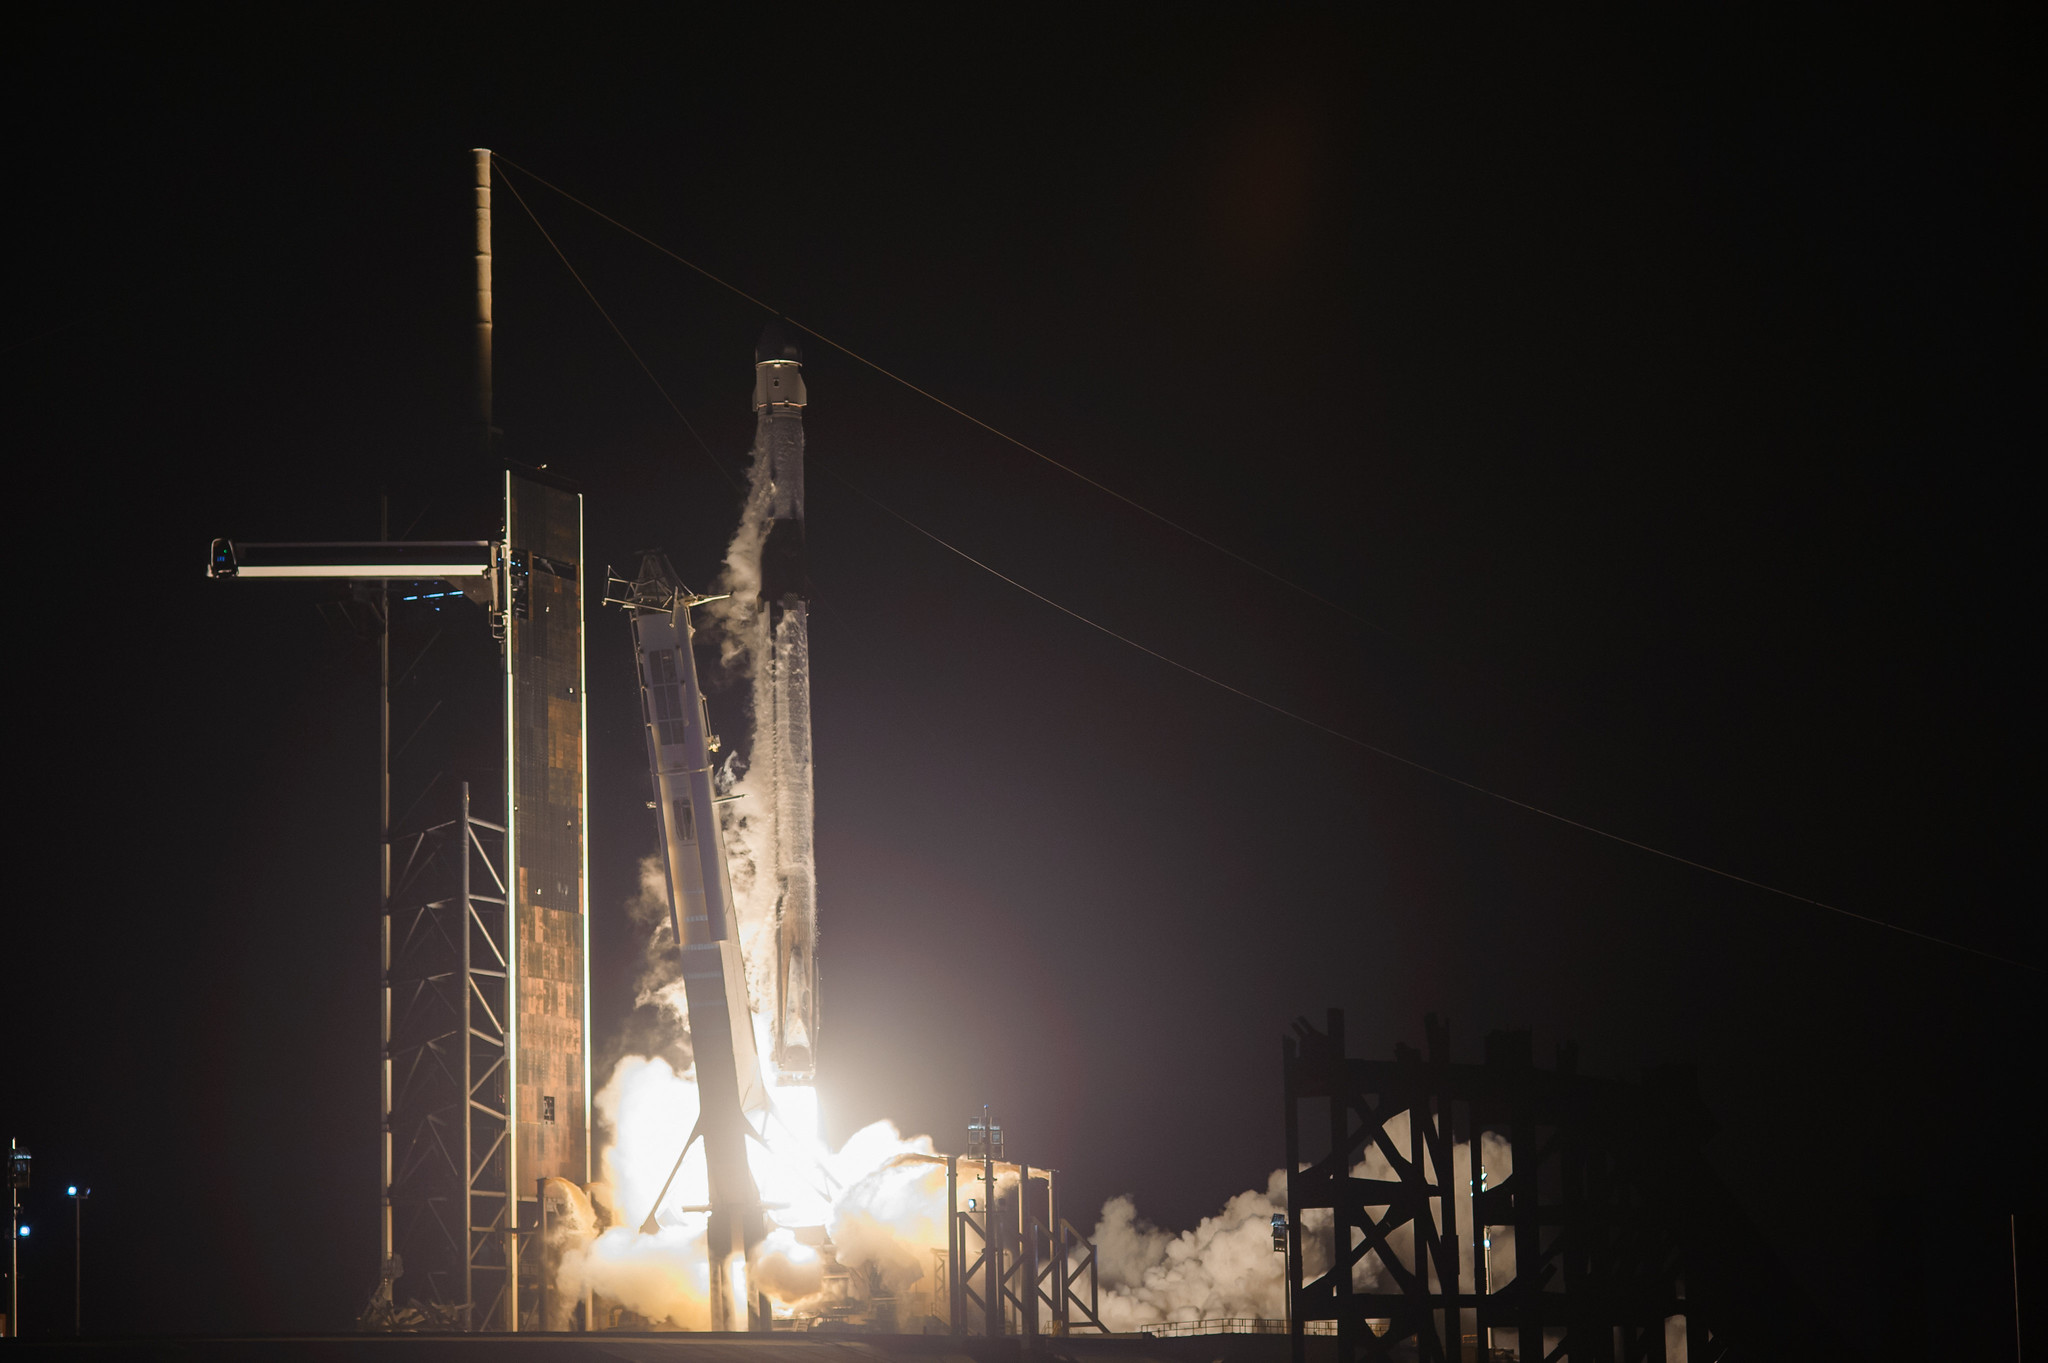 A SpaceX Falcon 9 rocket lifts off from Launch Complex 39A at NASA’s Kennedy Space Center in Florida at 3:14 a.m. on Aug. 29, 2021, carrying the Dragon spacecraft on its journey to the International Space Station for NASA and SpaceX’s 23rd commercial resupply services mission. Dragon delivered new science investigations, supplies, and equipment to the crew aboard the orbiting laboratory. Credit: NASA/Kevin O'Connell and Kenny Allen
